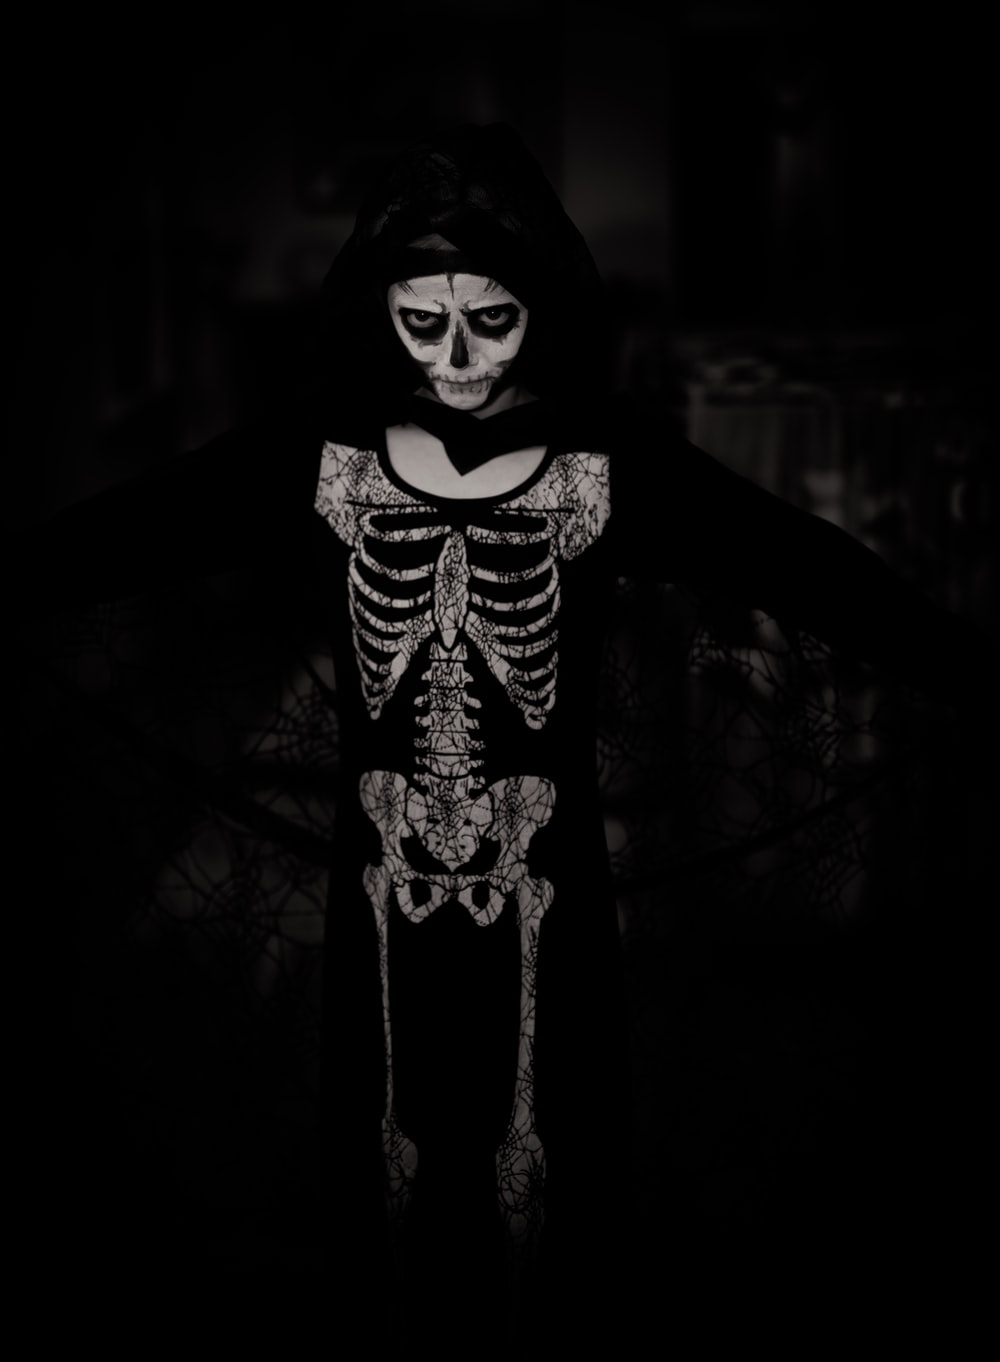 Skeleton Face Picture. Download Free Image